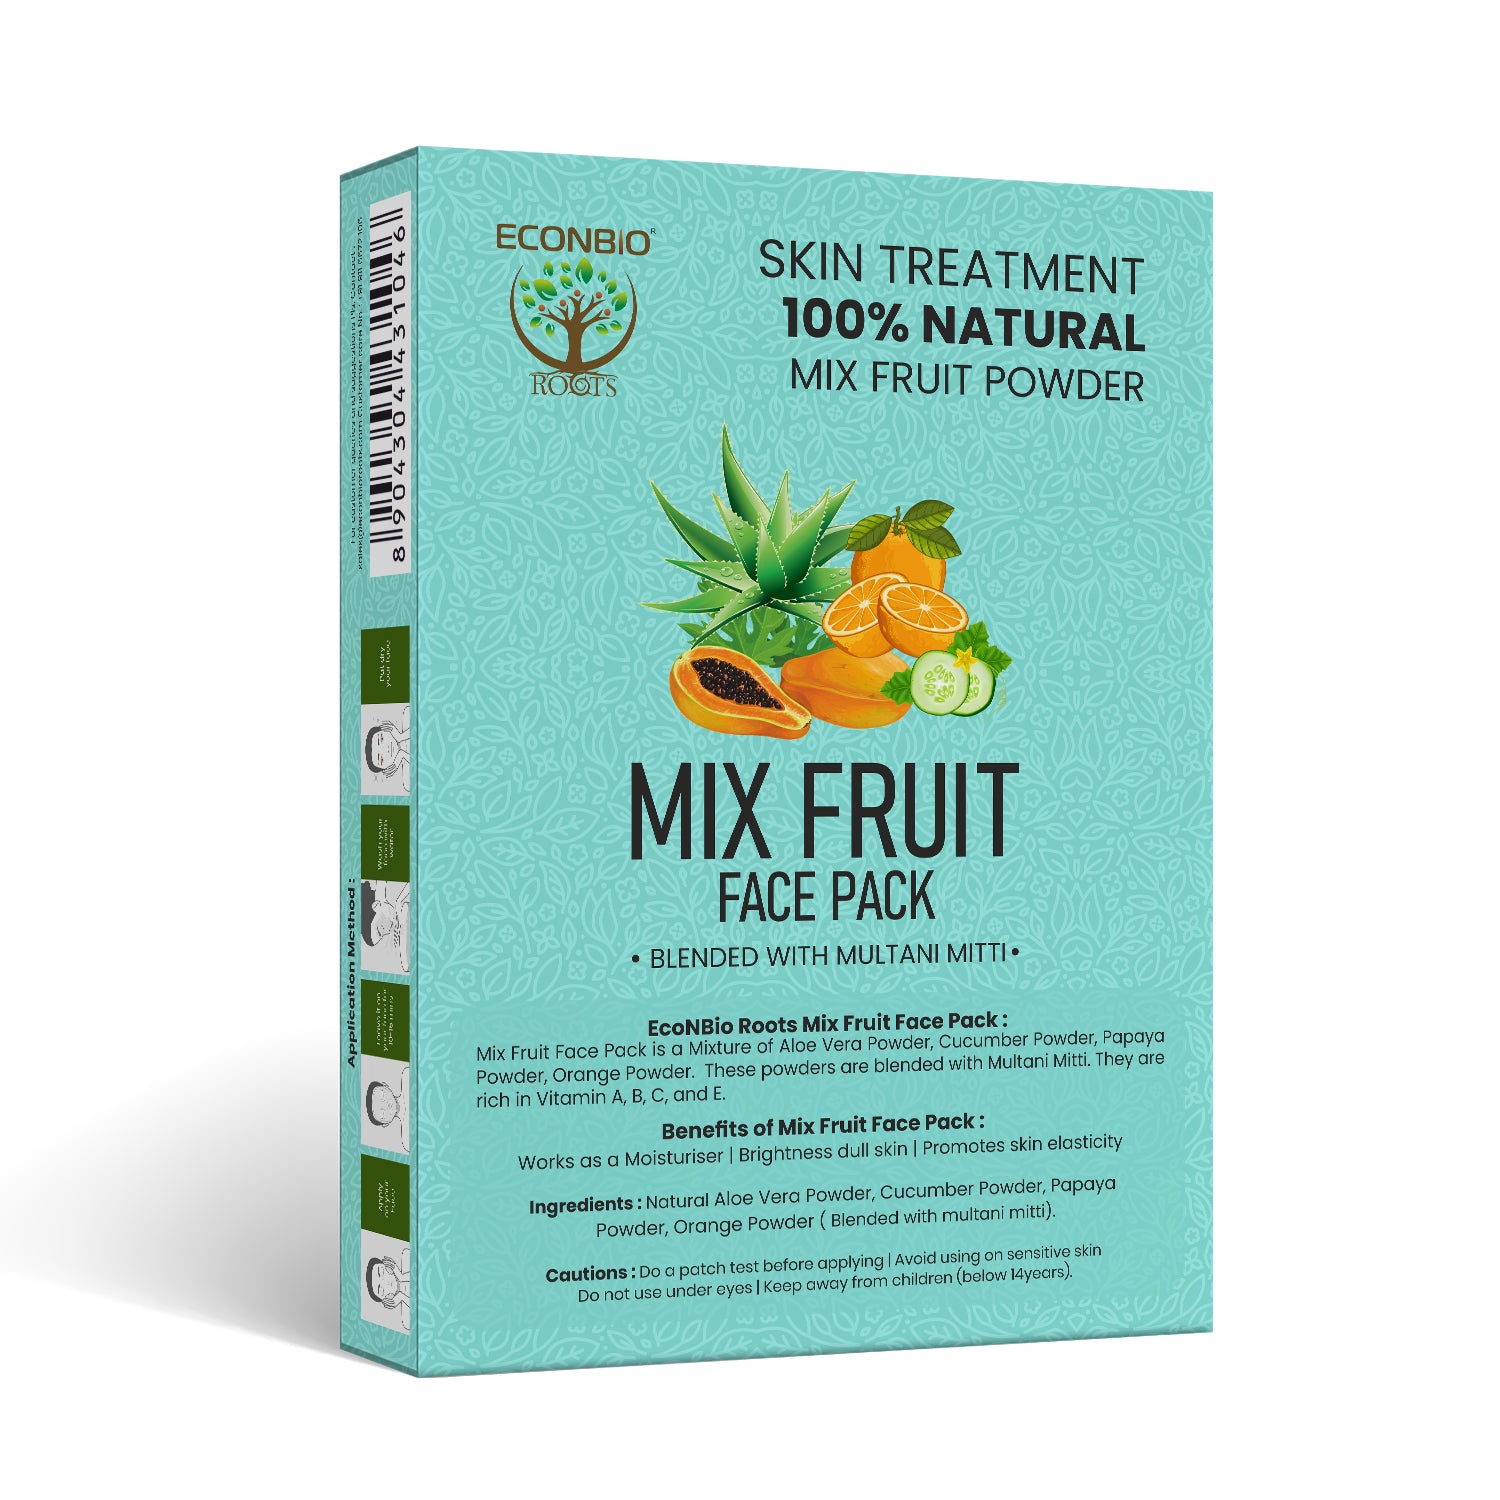 ECONBIO ROOTS 100% Natural Mix Fruit Face Pack 50g (Pack of 3)